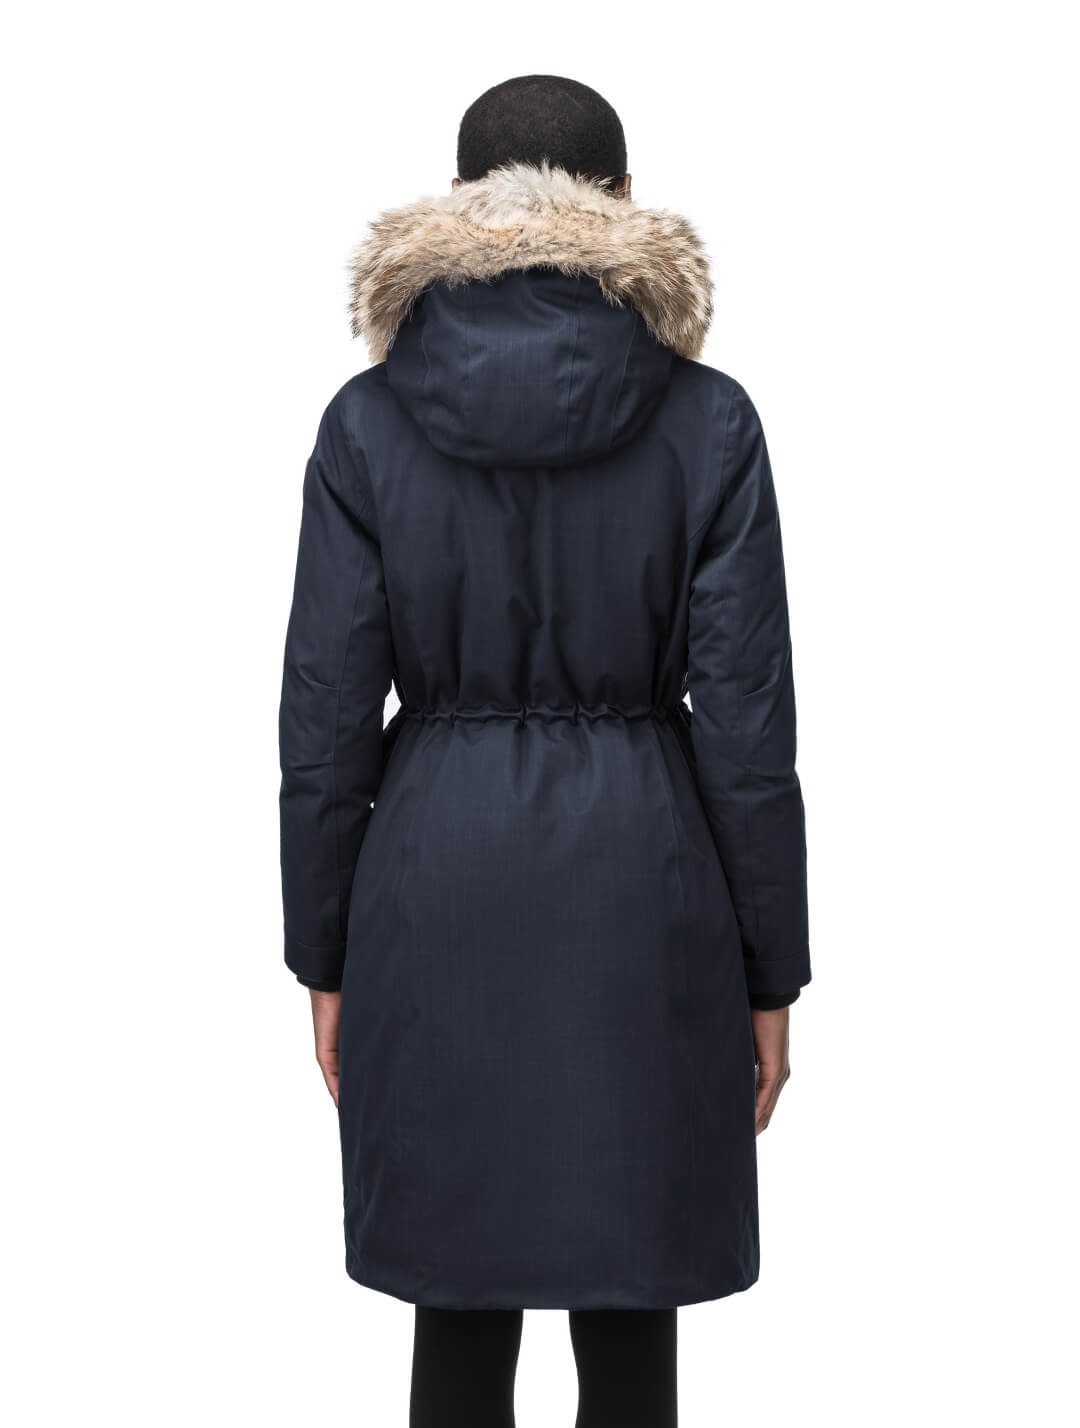 Zenith Ladies Knee Length Parka in knee length, Canadian duck down insulation, removable hood with removable fur ruff trim, and two-way front zipper, in Navy